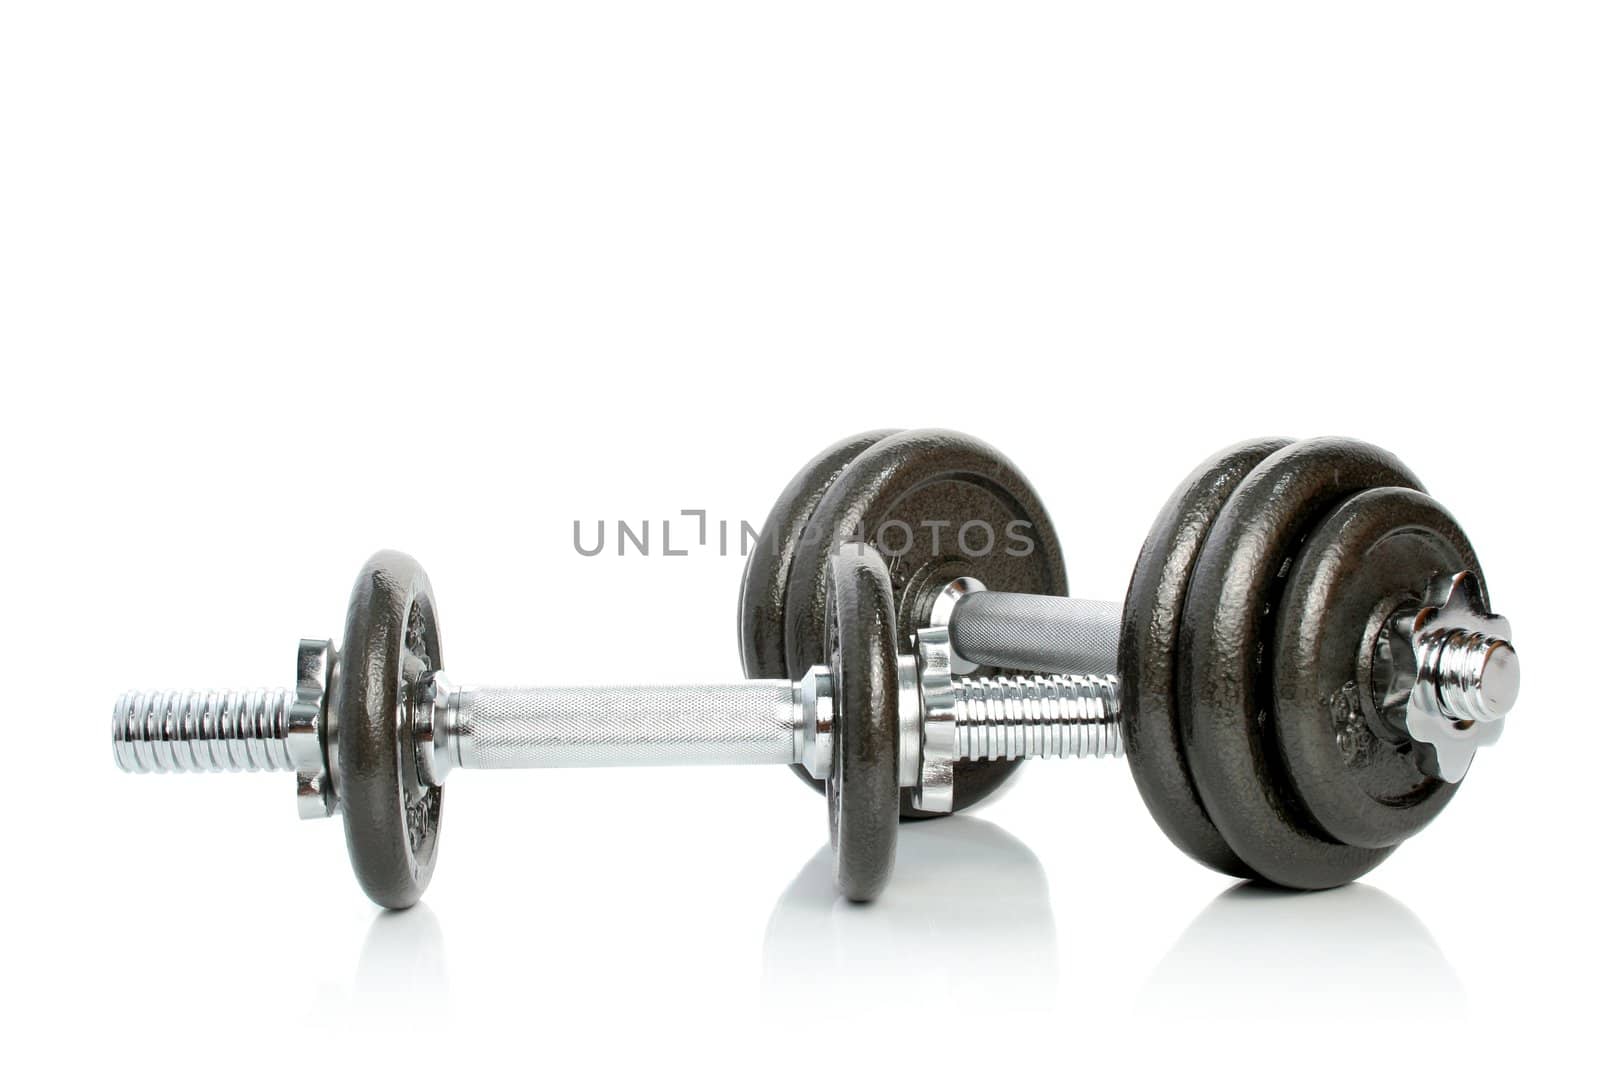 The weights and its reflection on white 2